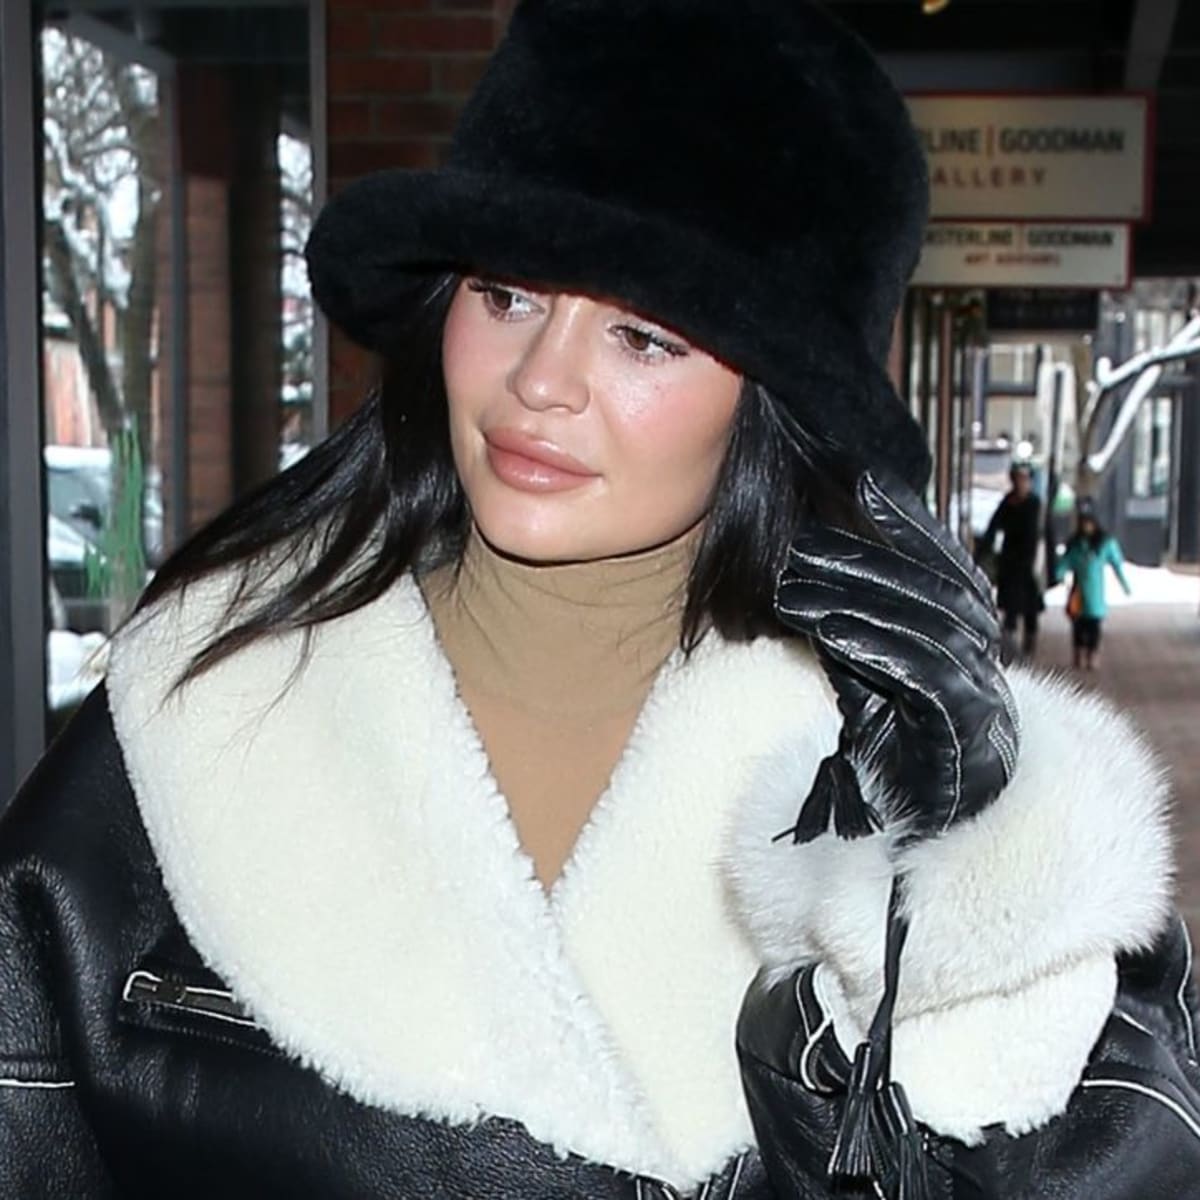 Kylie Jenner's fluffy Aspen outfit is peak winter glam-goth – see